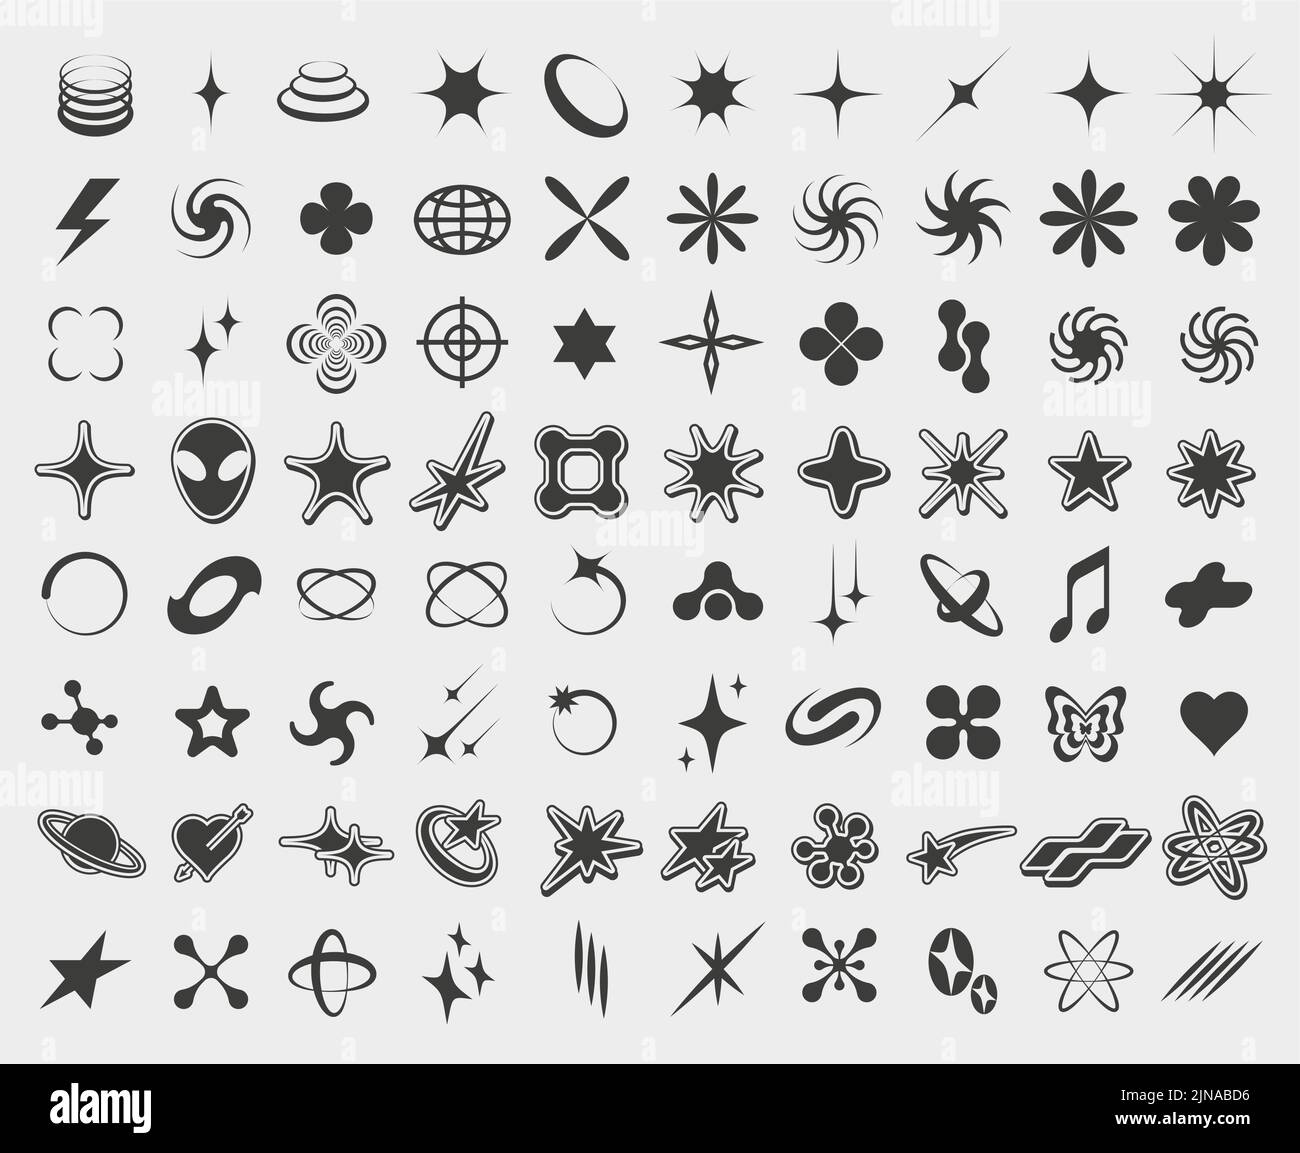 Jump into the cute y2k symbols trend with these cute symbols